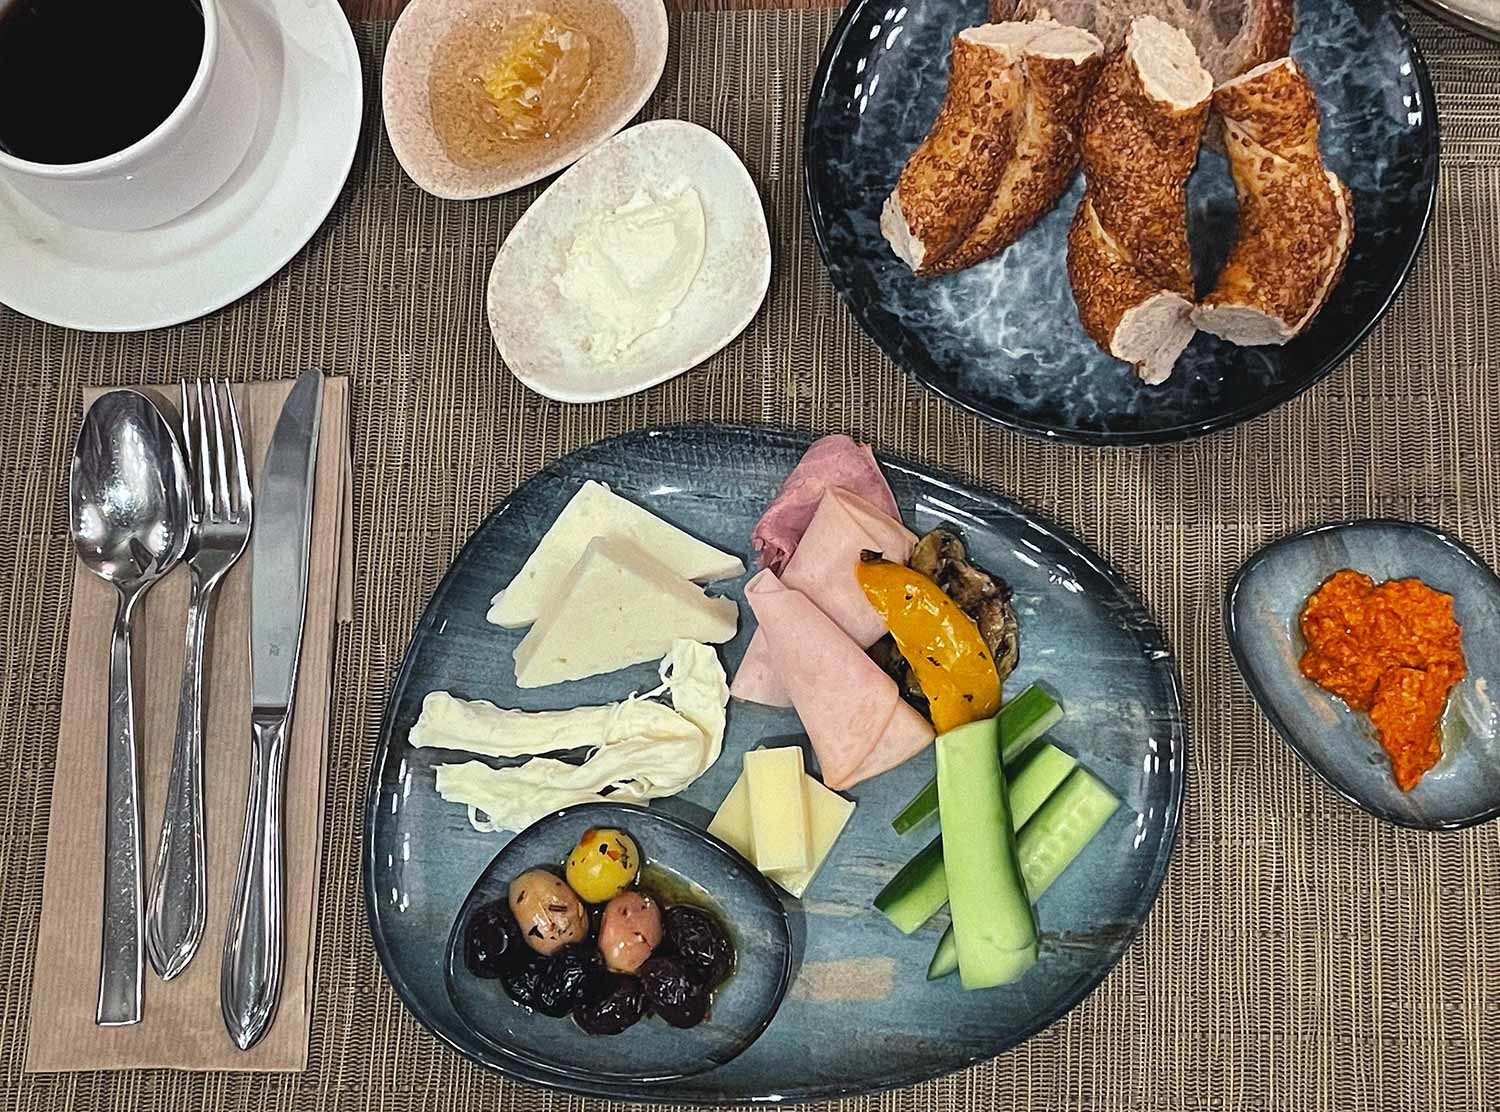 The Bank Hotel Istanbul The Turkish breakfast! Oh man oh man, move over Aussies, this is a serious breakfast rival for you. Insider tip, kaymak and honeycomb honey on simit bread, a match made in breakfast heaven!